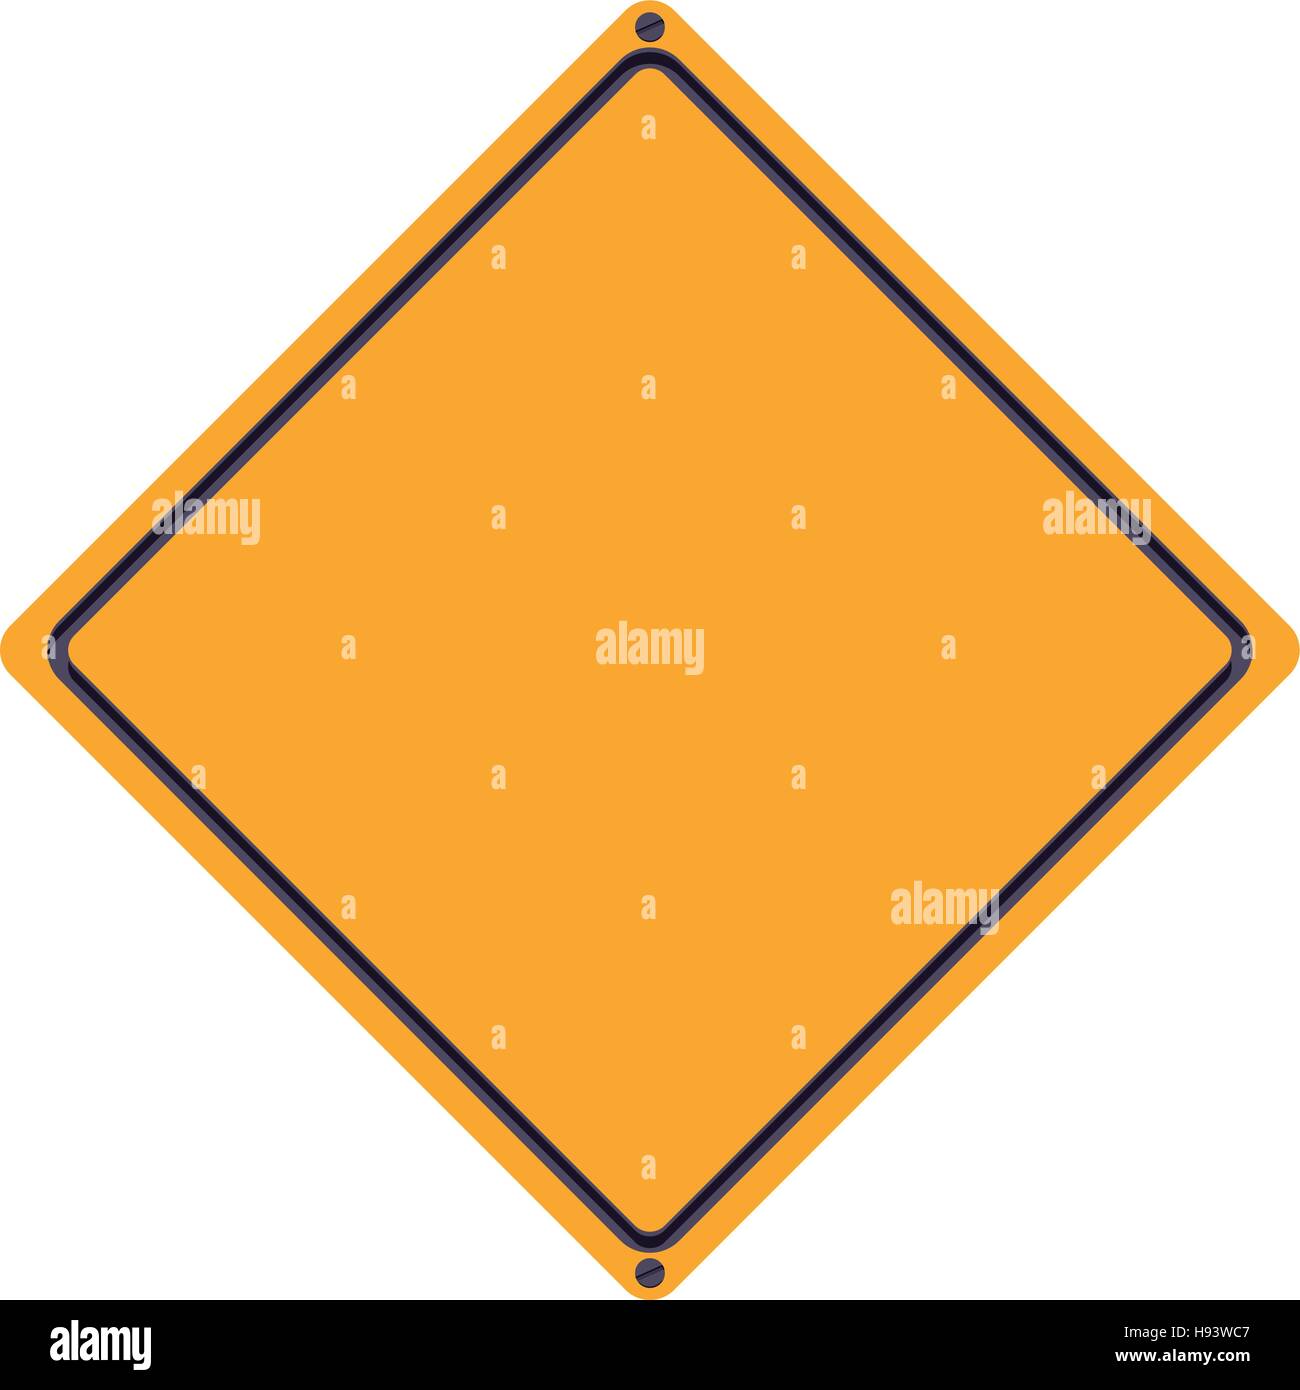 Yellow road sign icon. Street information warning and guide theme. Isolated design. Vector illustration Stock Vector